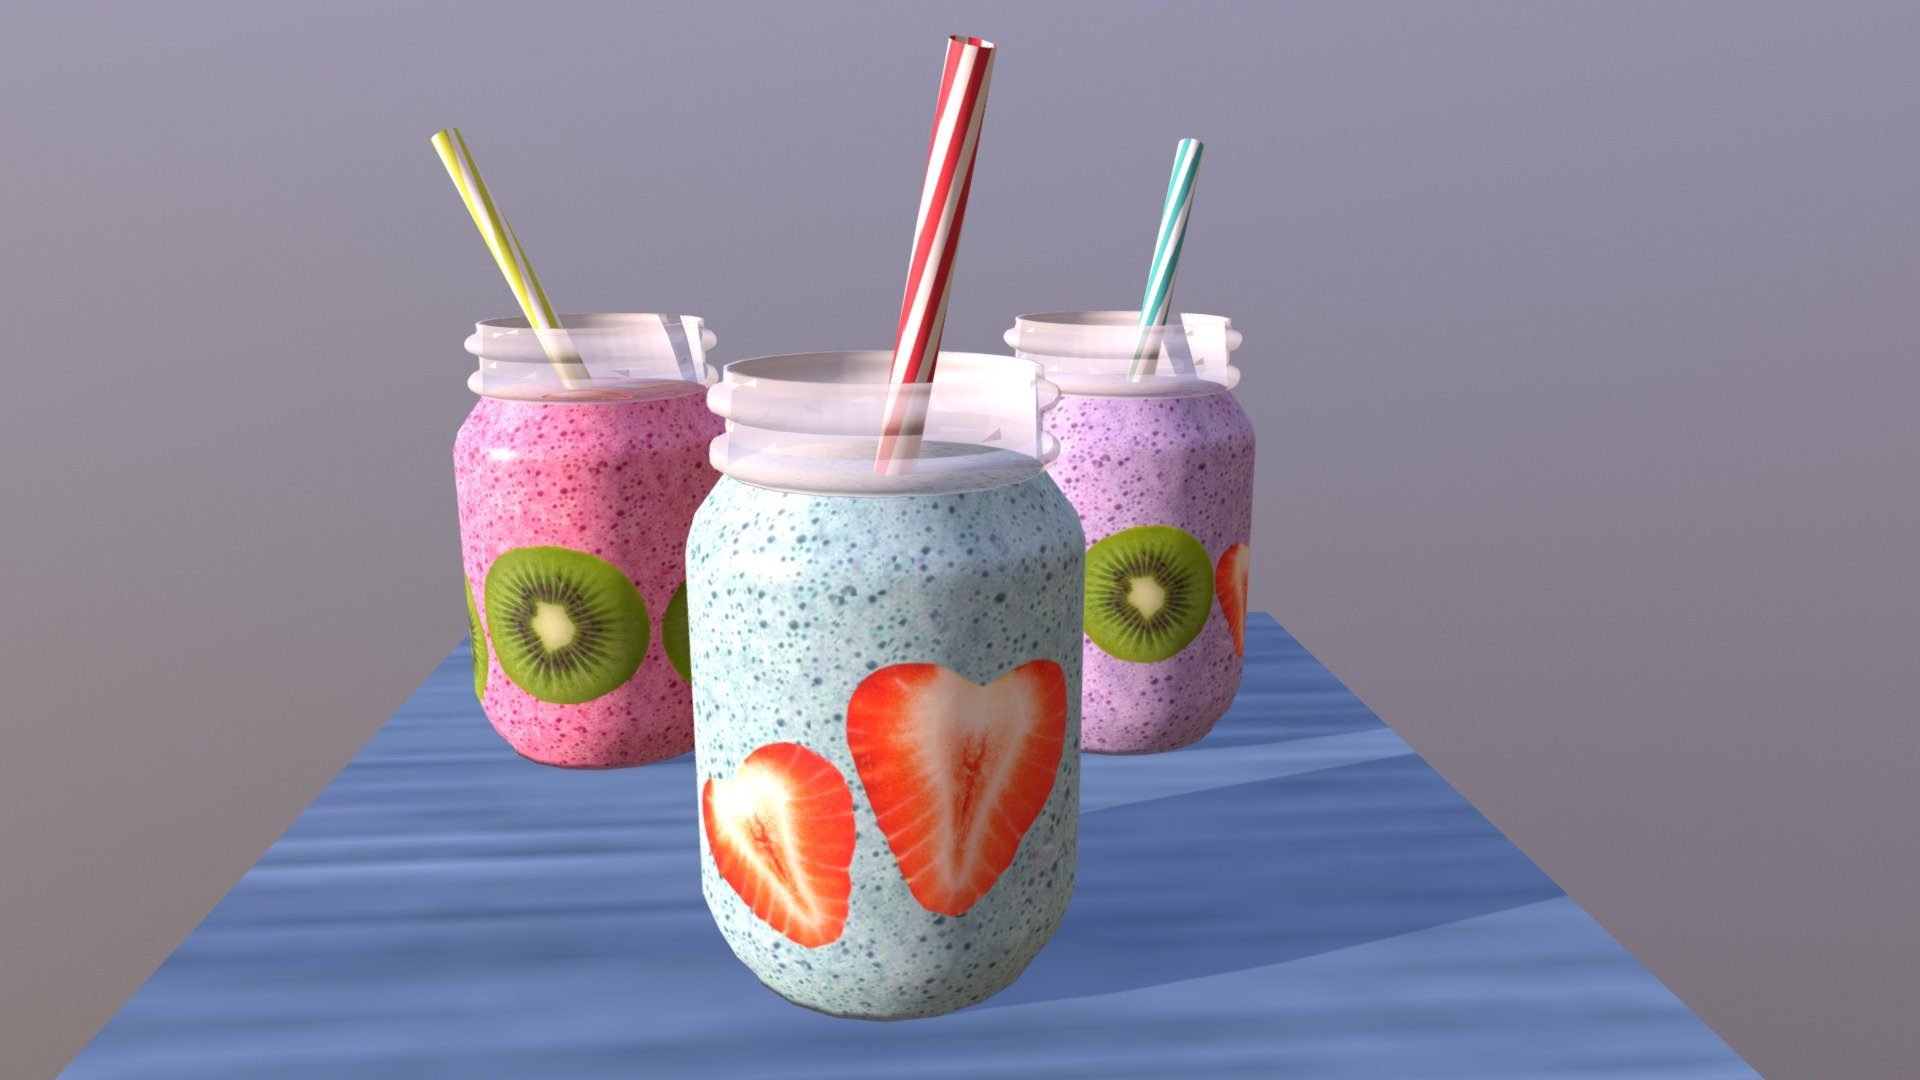 Fruit smoothies - Smoothies - 3D model by HannahKim (@JangMiMedia) 3d model